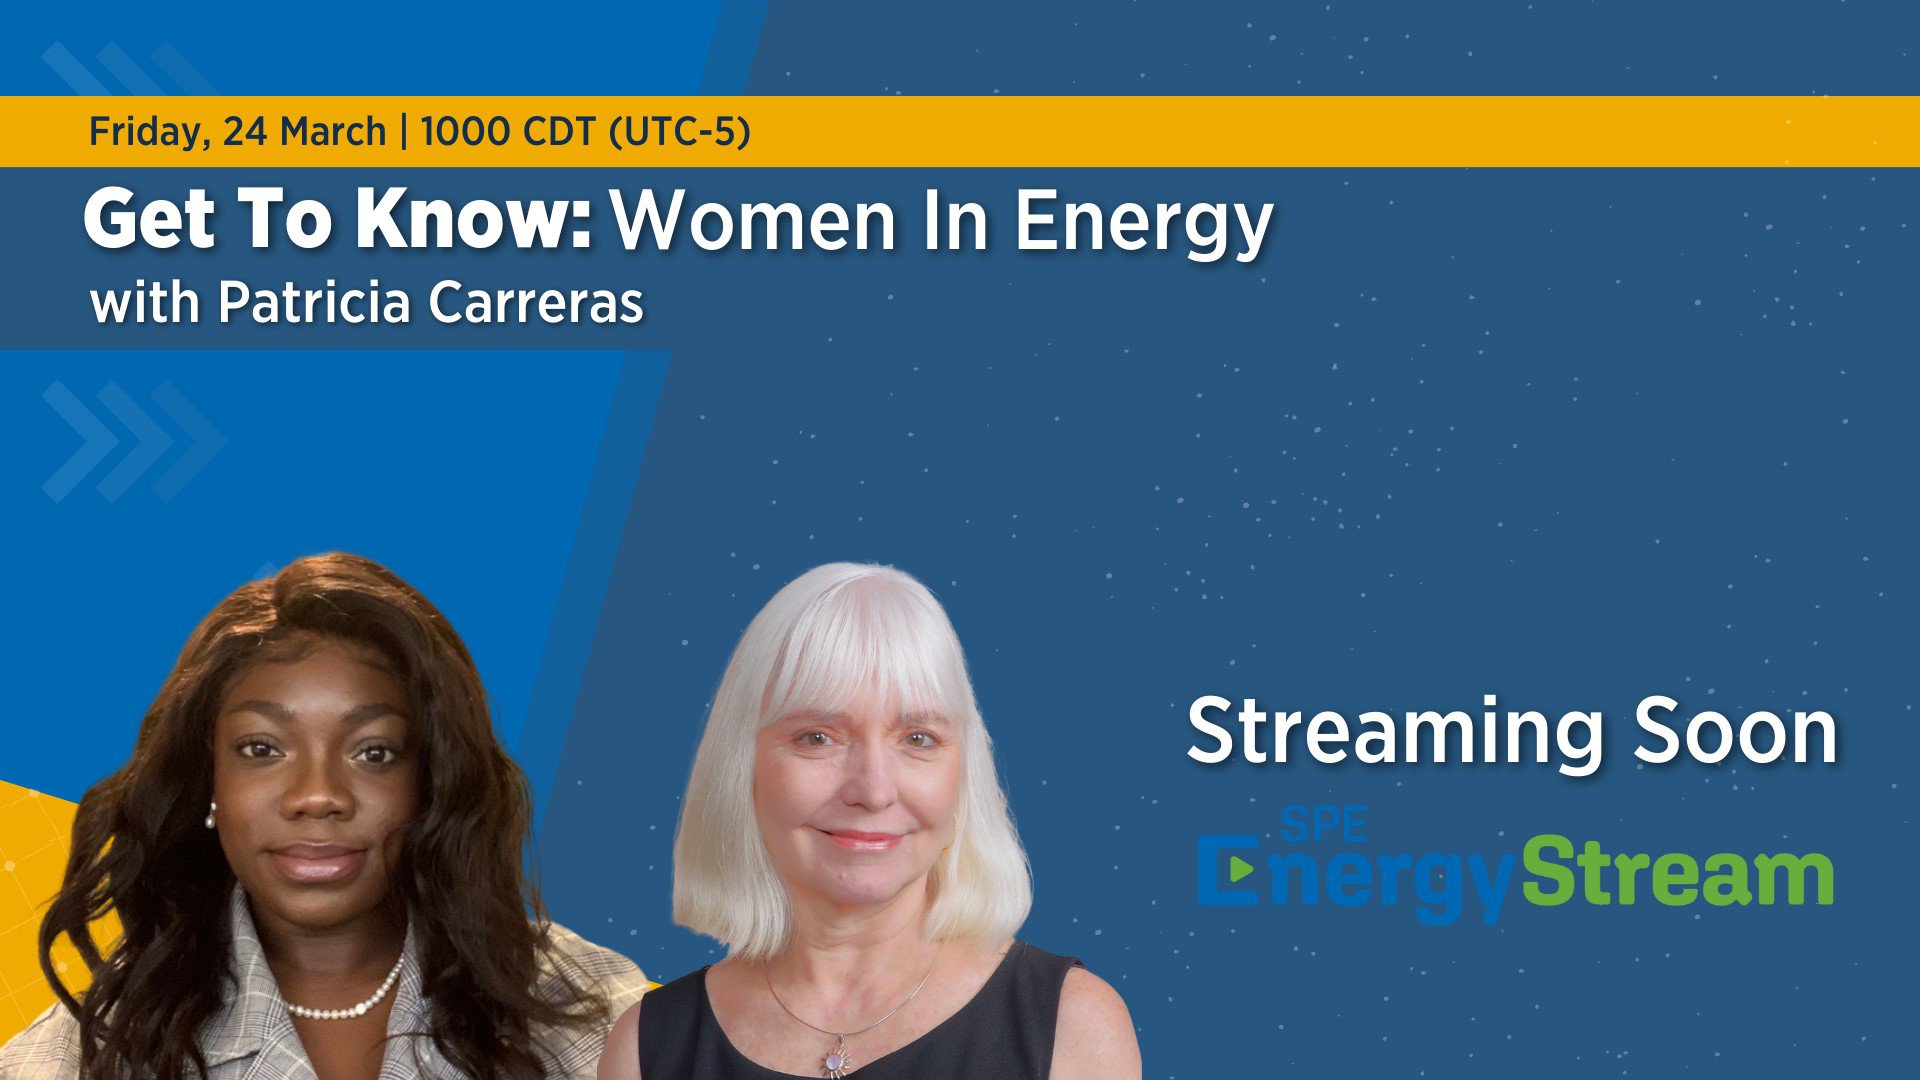 Get To Know: Women In Energy with Patricia Carreras